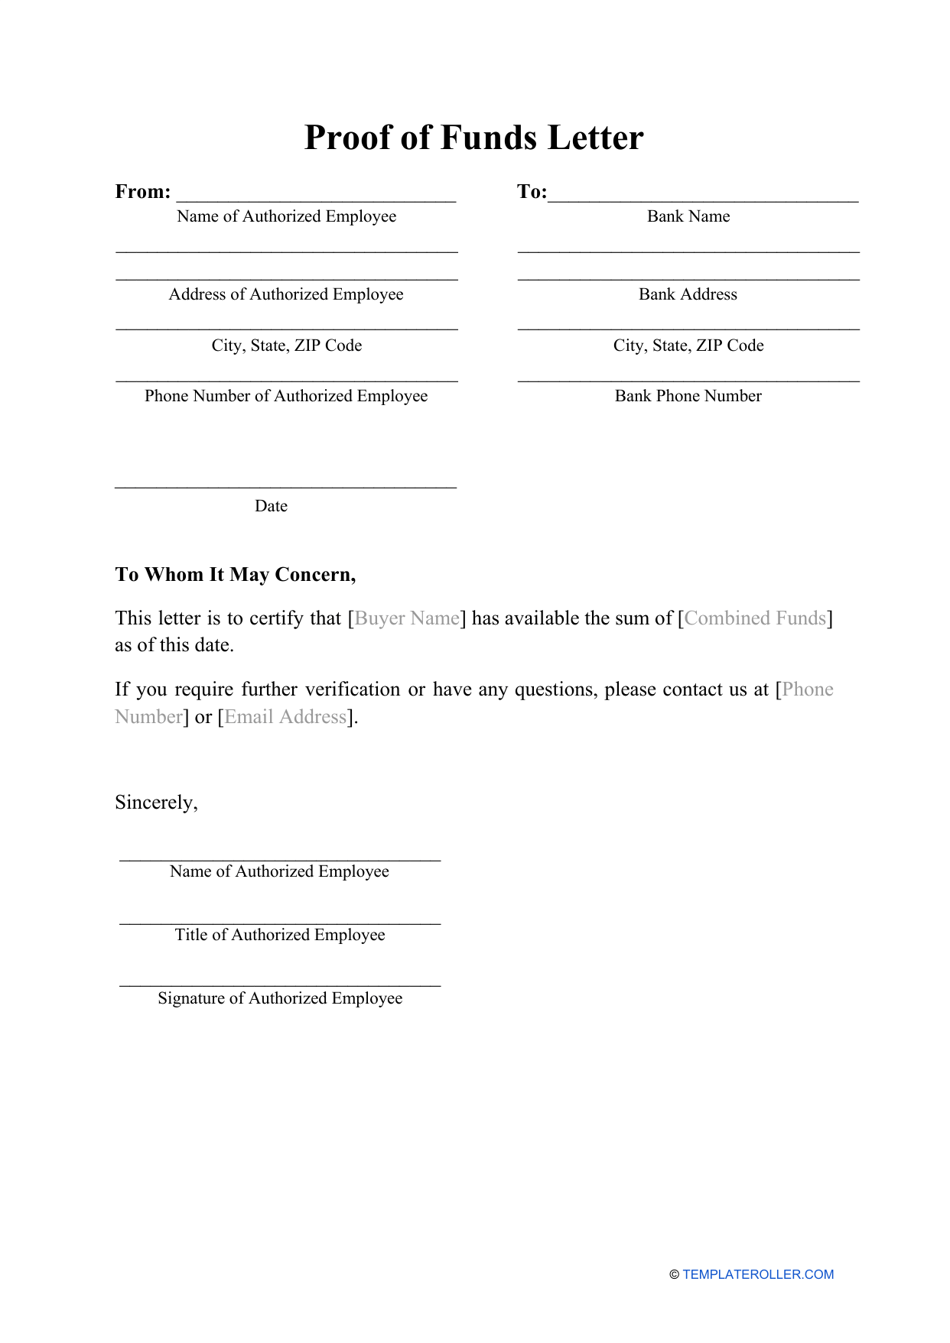 Proof of Funds Letter Template Preview